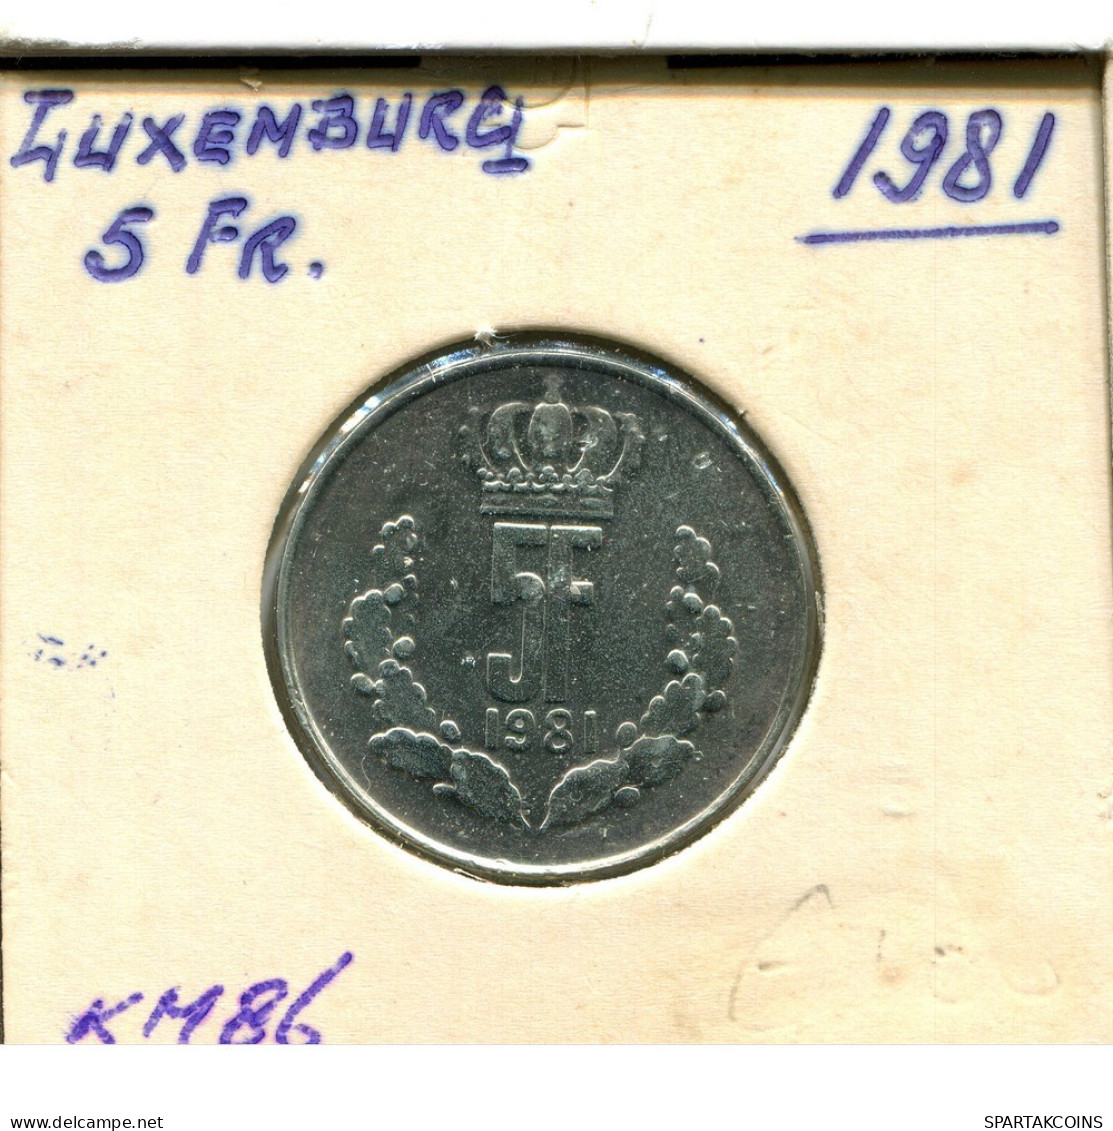 5 FRANCS 1981 LUXEMBURGO LUXEMBOURG Moneda #AT232.E.A - Luxembourg